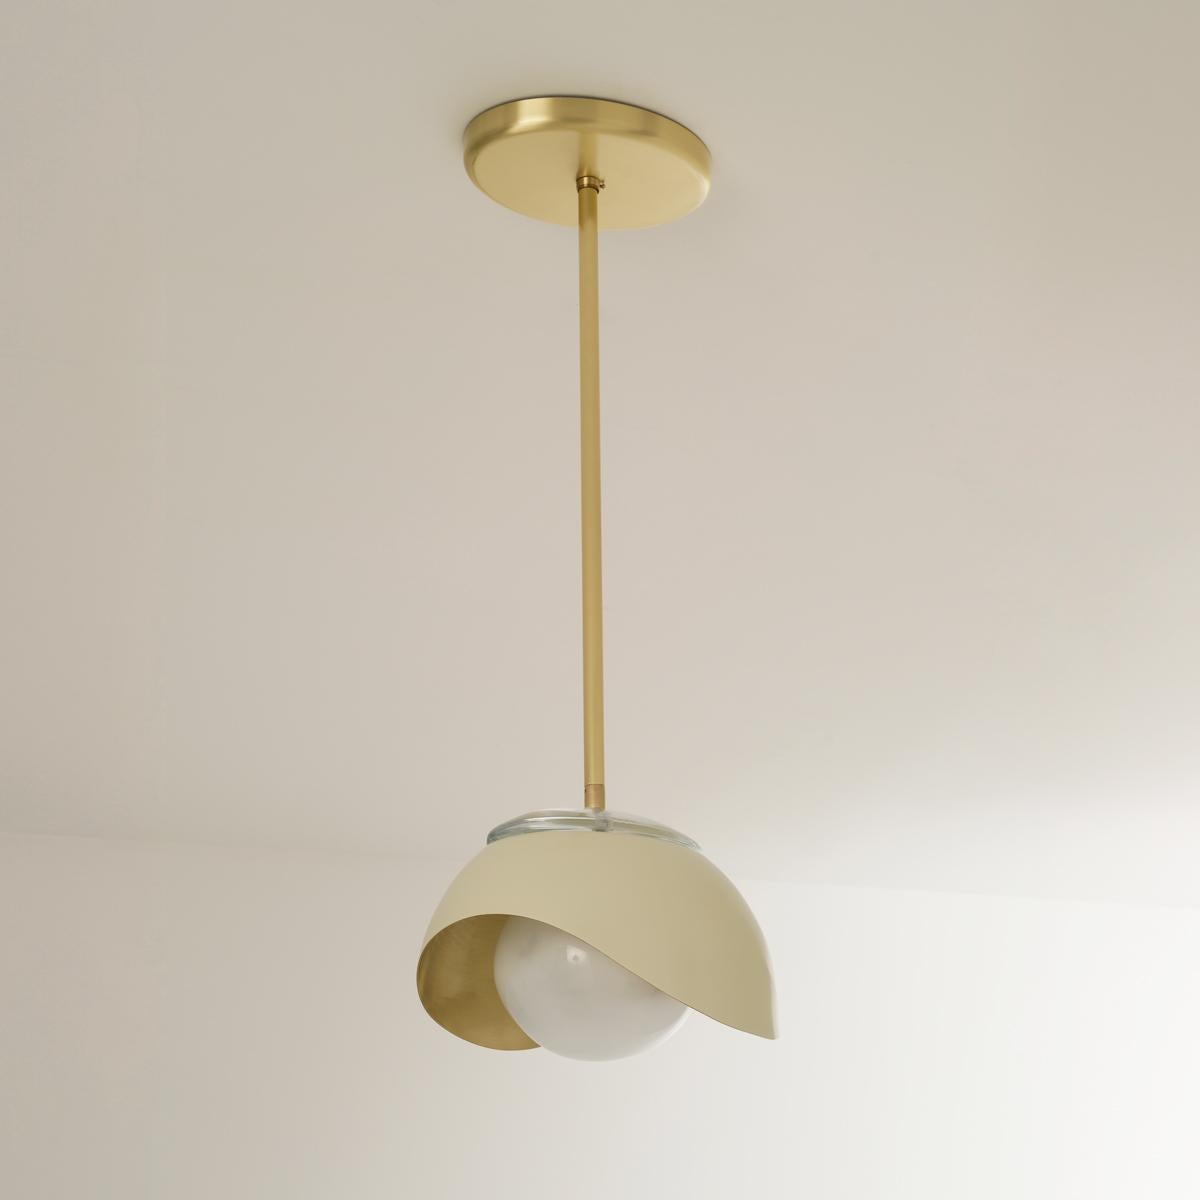 Perla Pendant by Gaspare Asaro-White and Satin Brass In New Condition For Sale In New York, NY